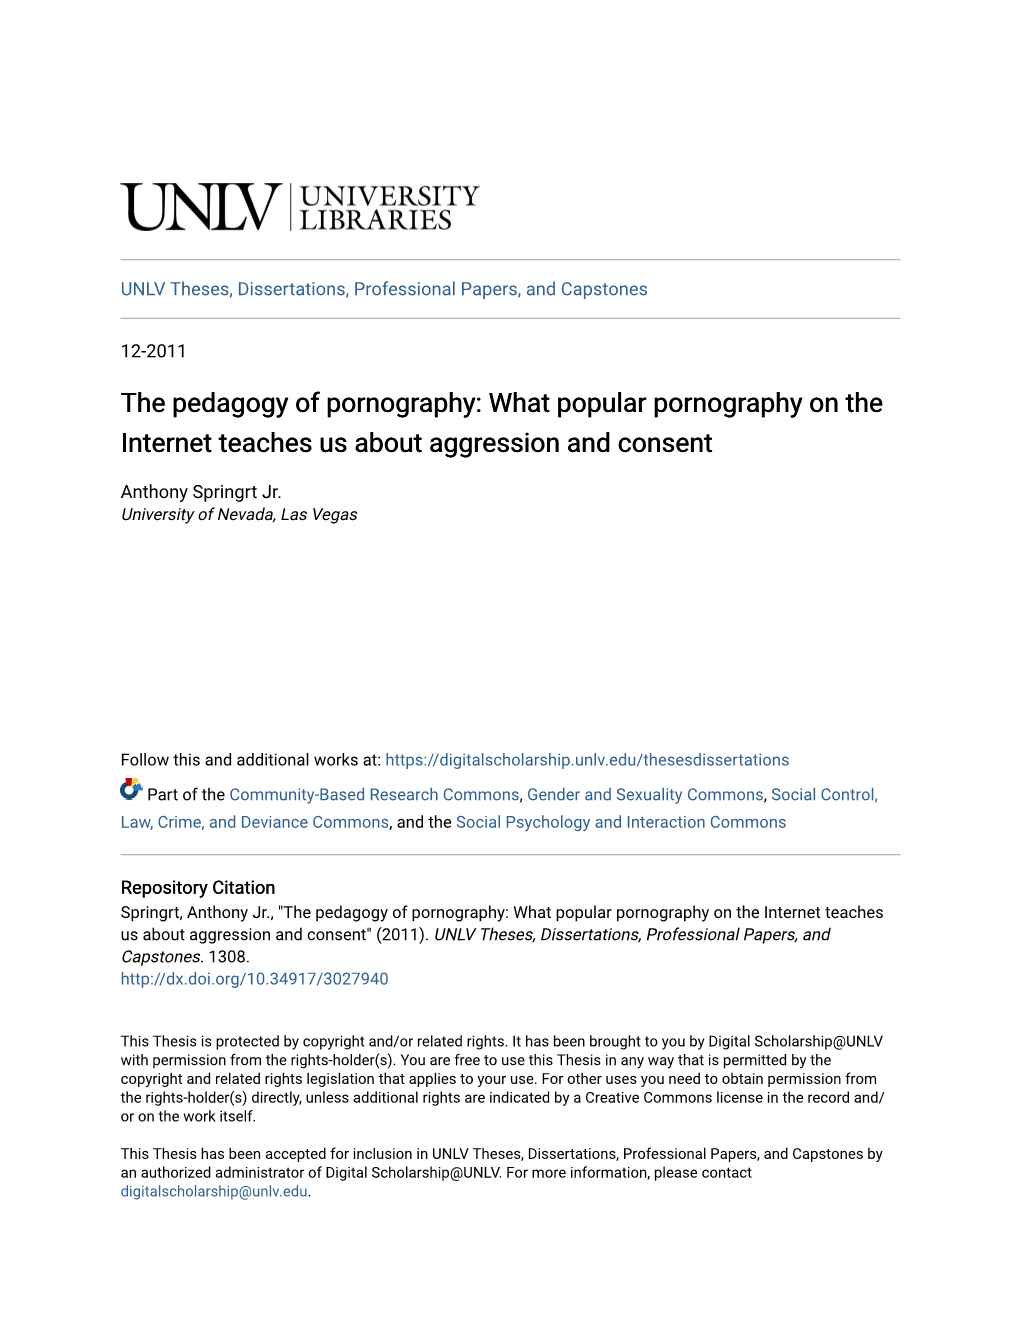 The Pedagogy of Pornography: What Popular Pornography on the Internet Teaches Us About Aggression and Consent